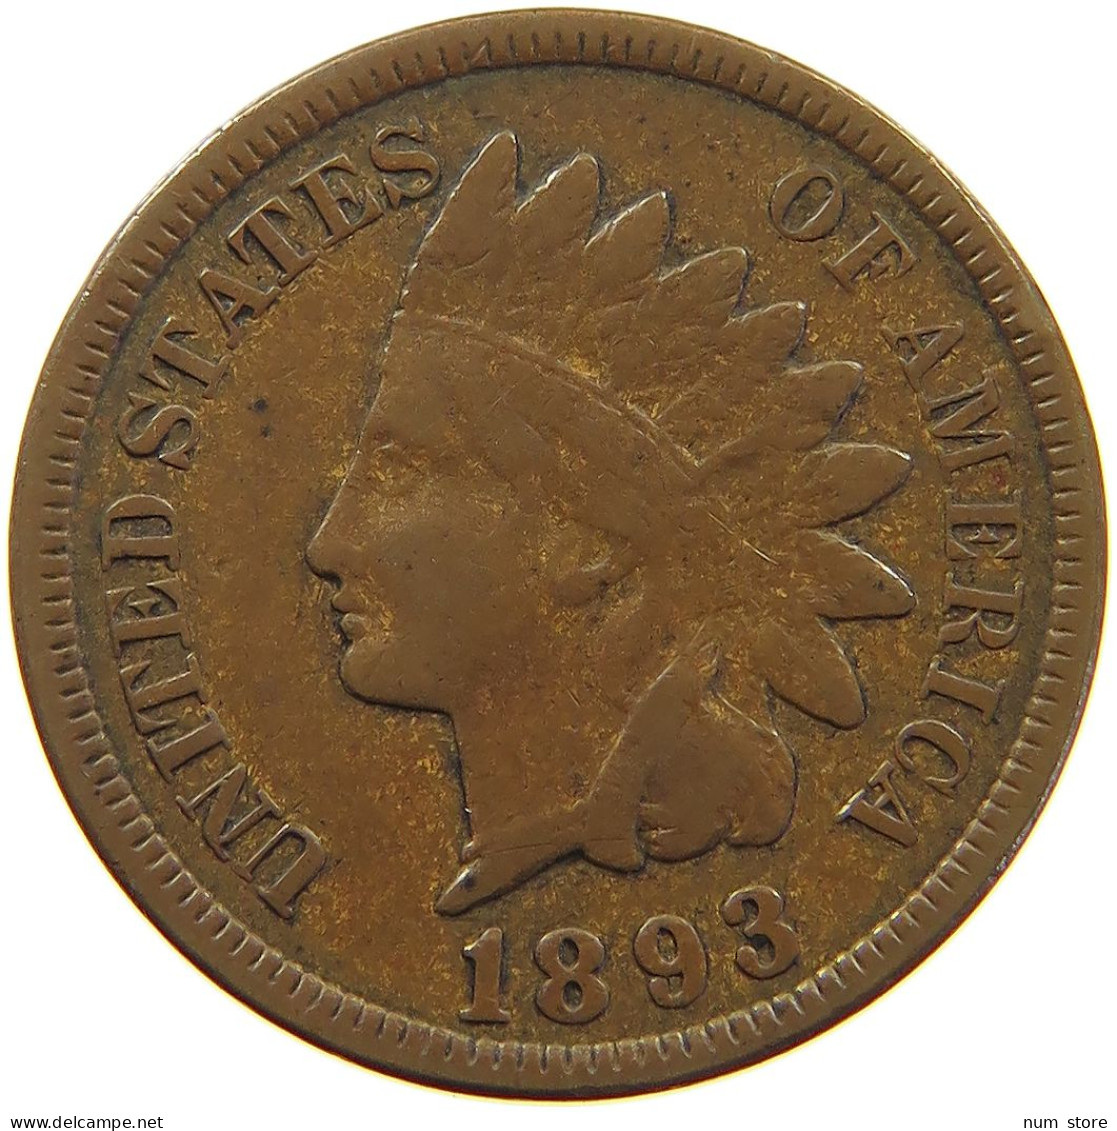 UNITED STATES OF AMERICA CENT 1893 INDIAN HEAD #a063 0257 - 1859-1909: Indian Head